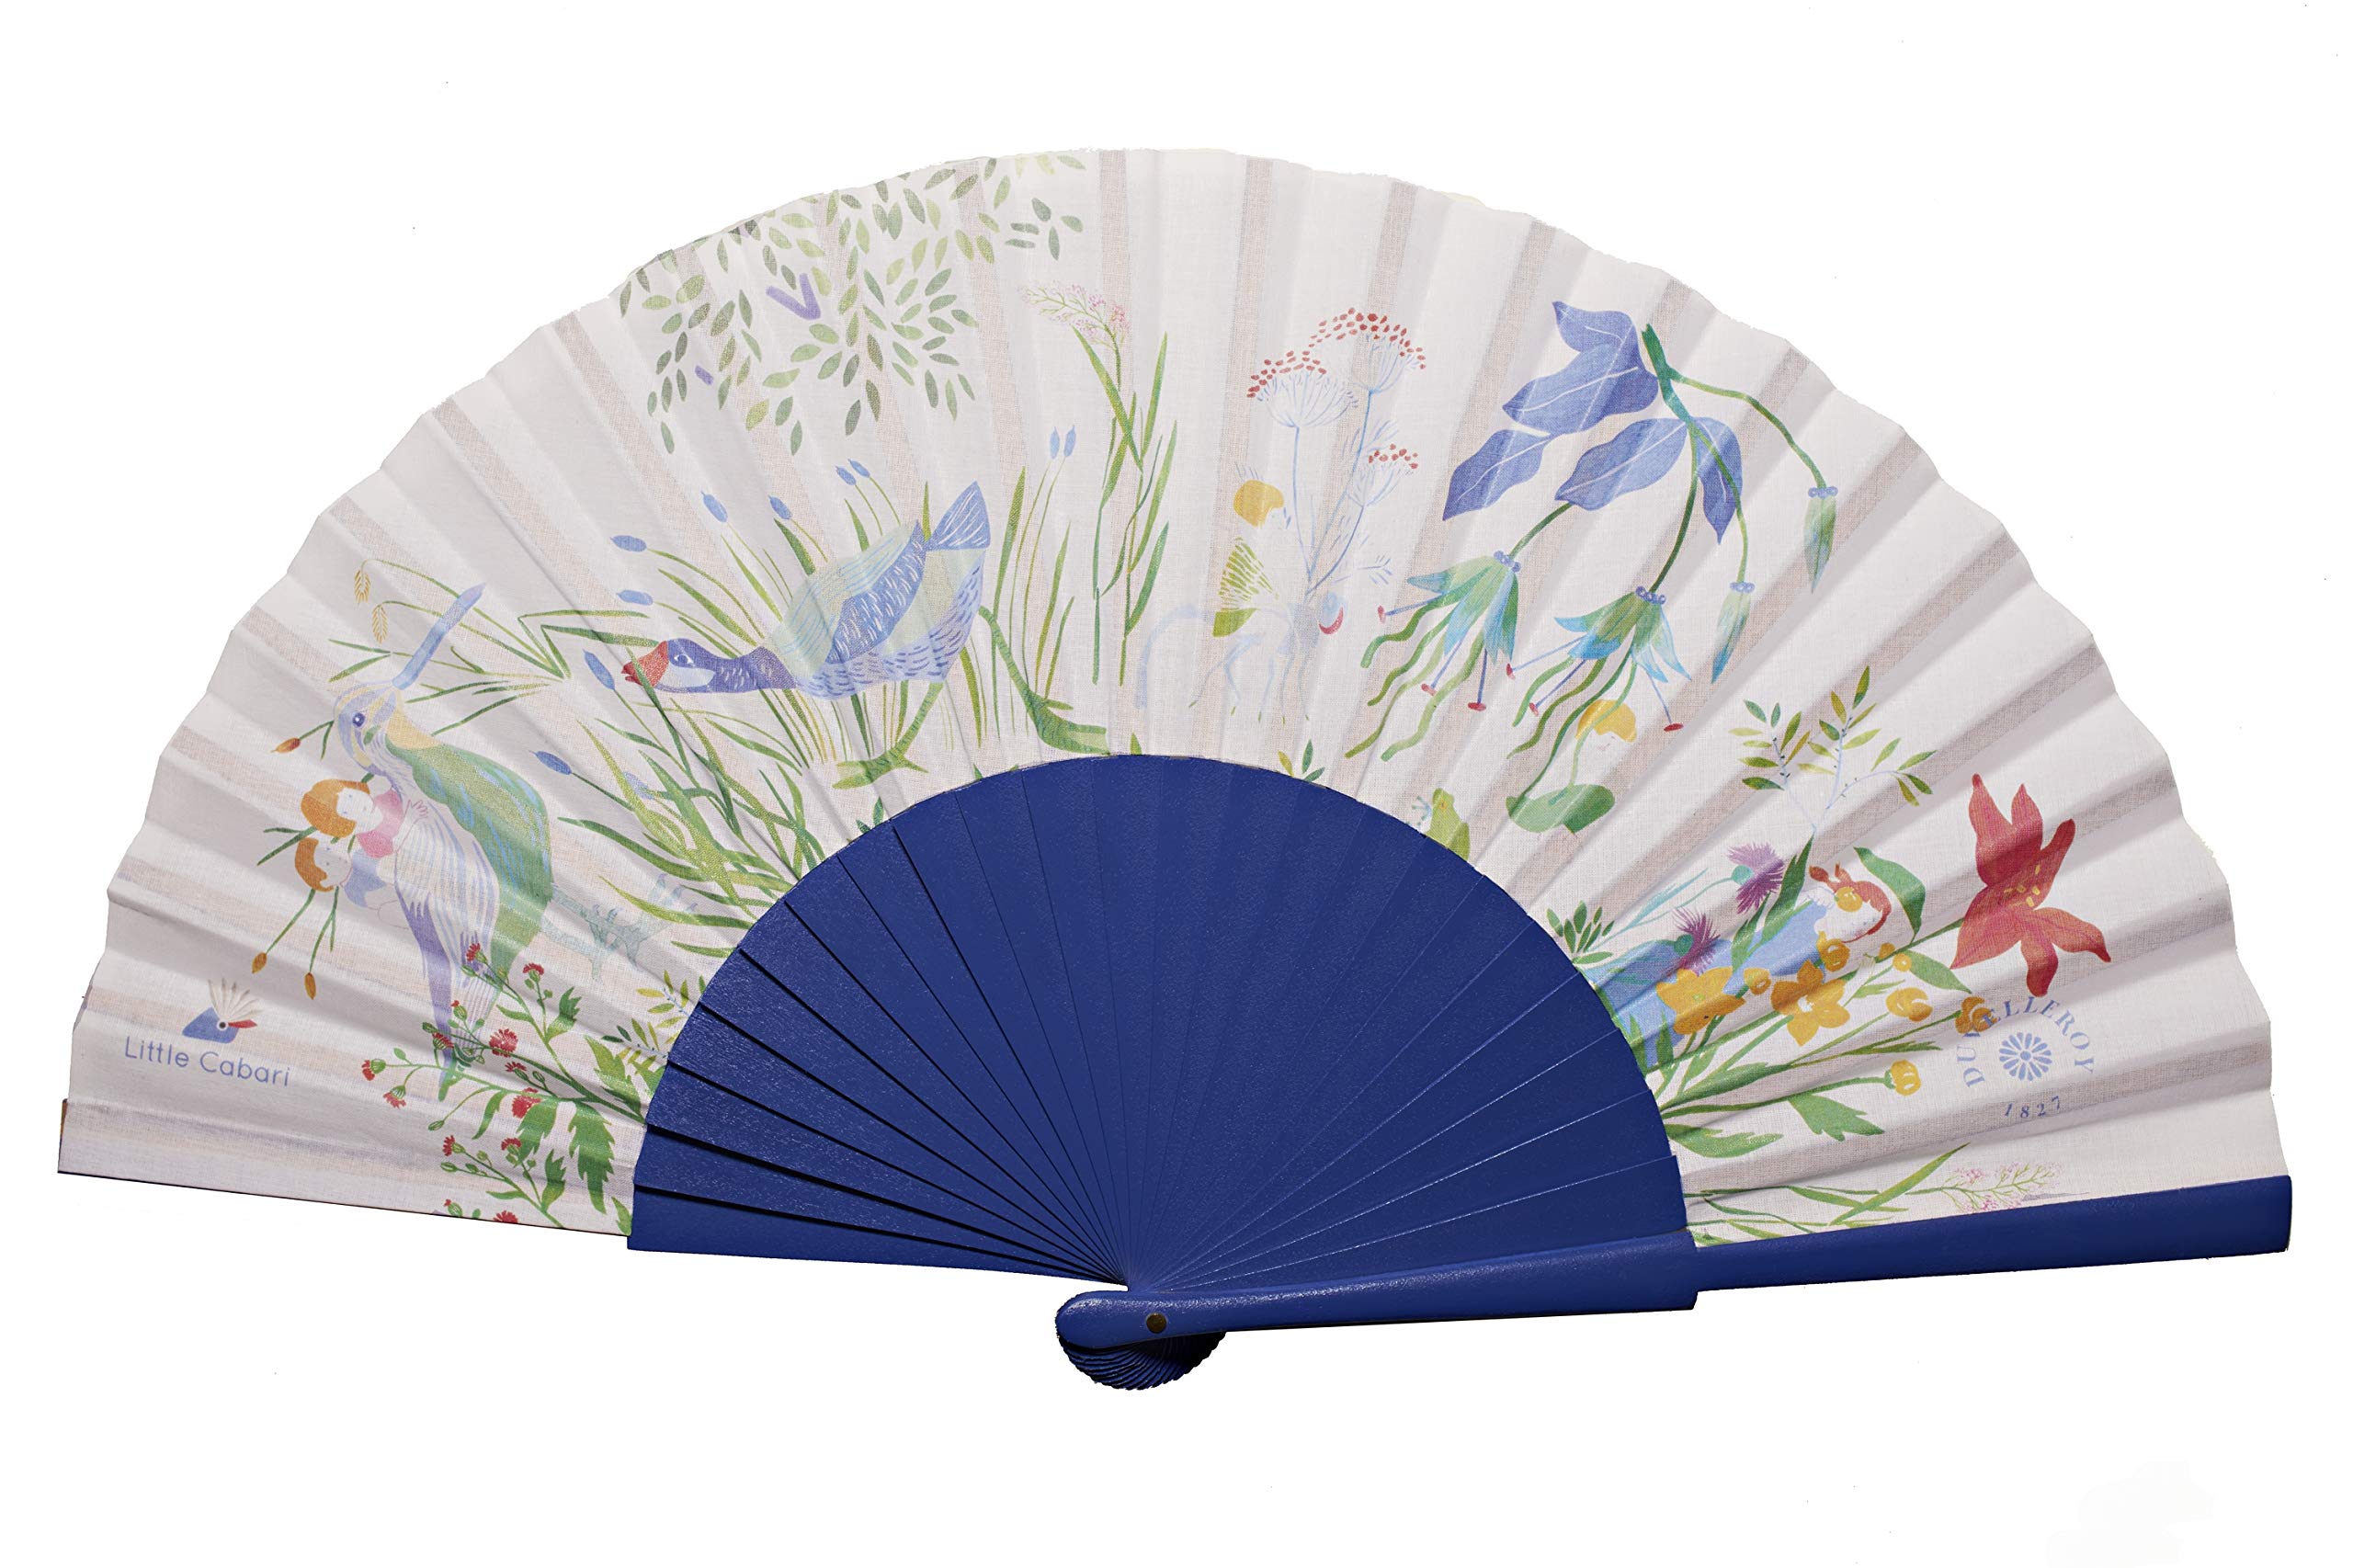 La Perfection Louis Tendresse Navy (blue tenderness) hand fan by DUVELLEROY PARIS 1827 MADE IN FRANCE